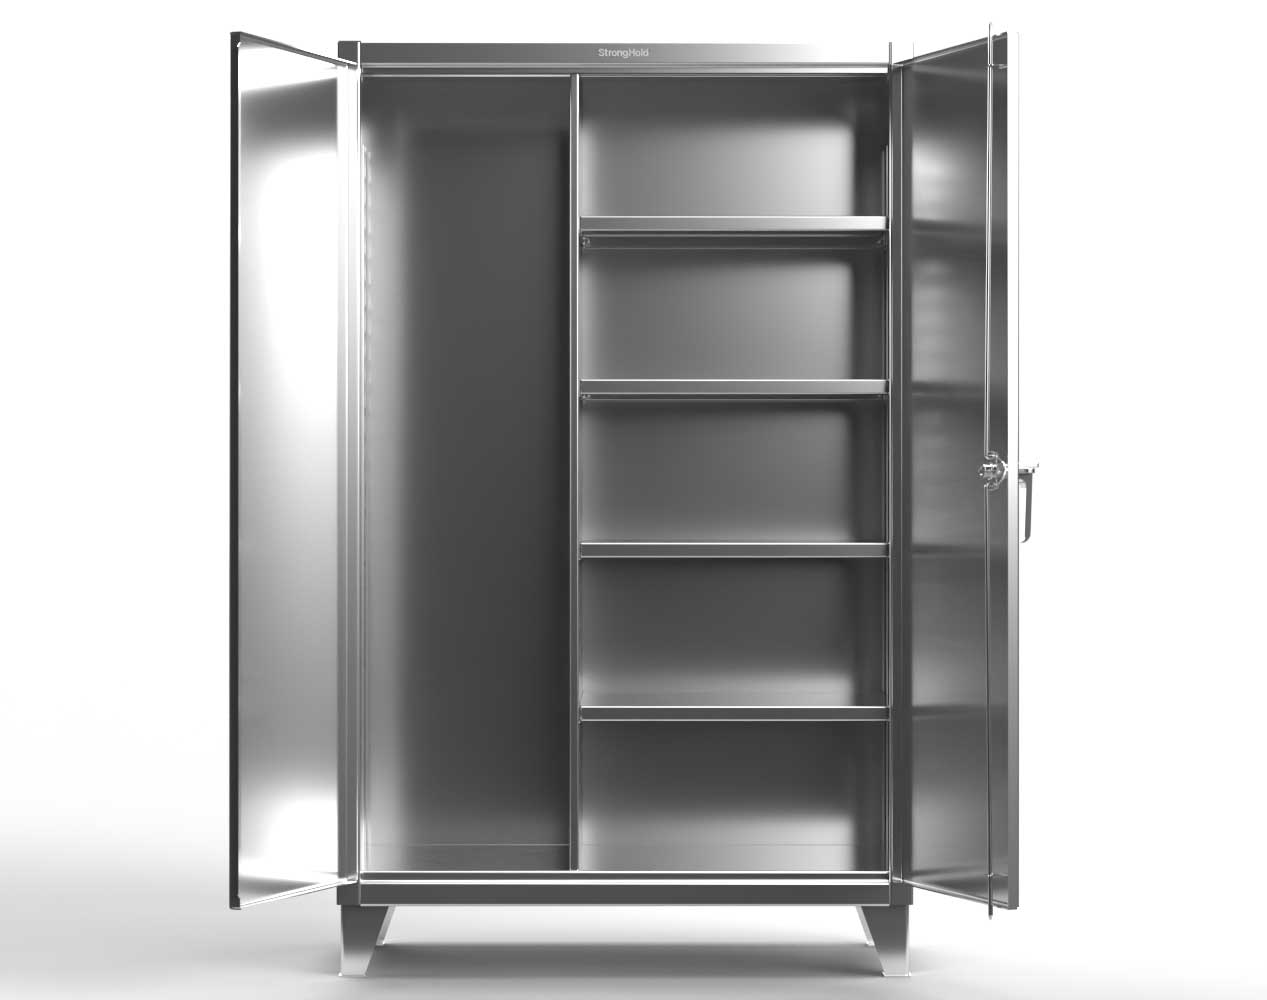 Extreme Duty 12 GA Stainless Steel Janitorial Cabinet with 4 Shelves - 60 In. W x 24 In. D x 78 In. H